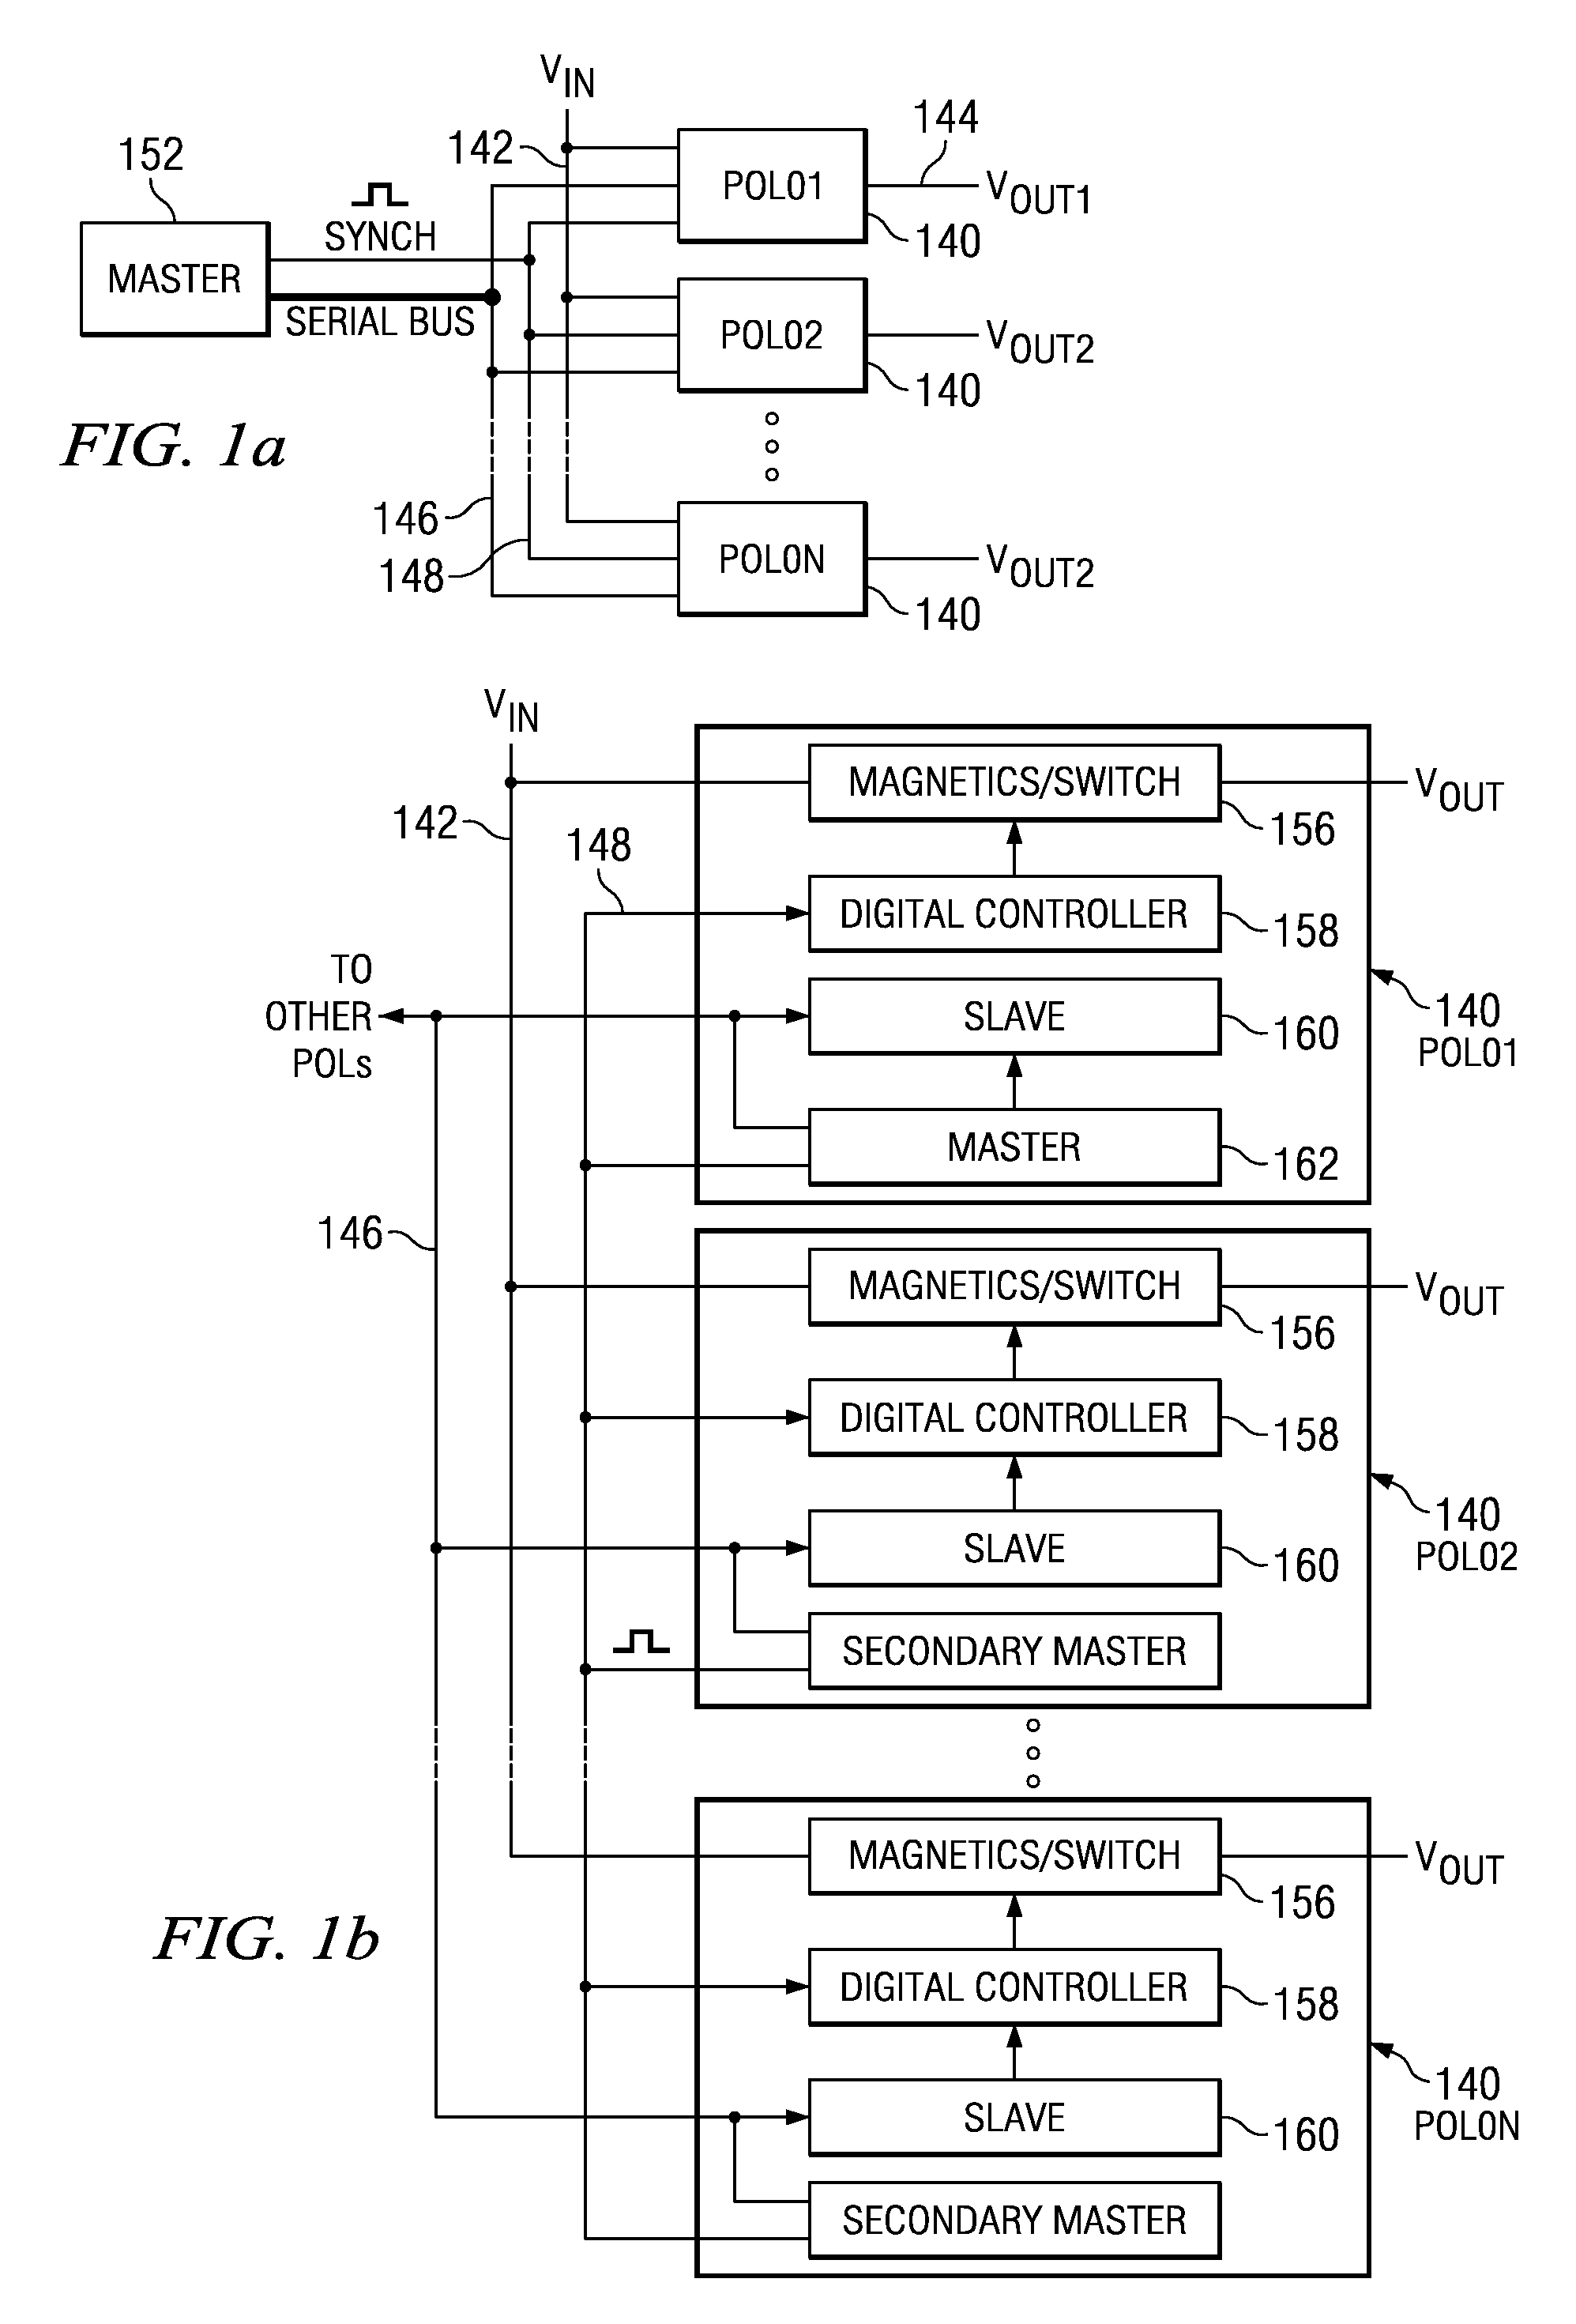 Distributed power supply system with shared master for controlling remote digital DC/DC converter